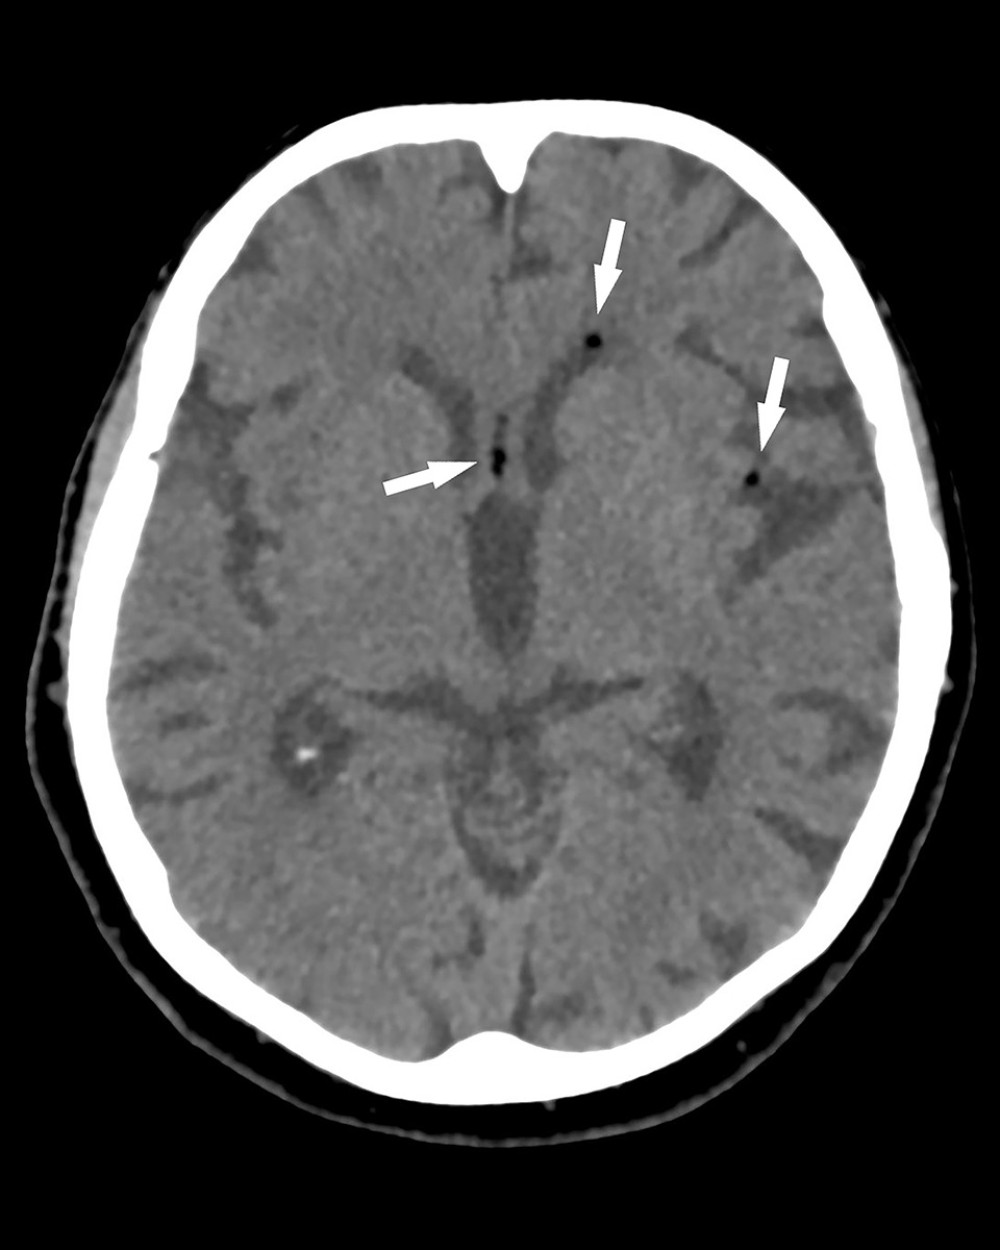 Three days after the trauma, fat droplets (arrows) were seen in the most anterior aspect of the frontal horns of the lateral ventricles, left Sylvian fissure, and the cistern of the lamina terminalis.